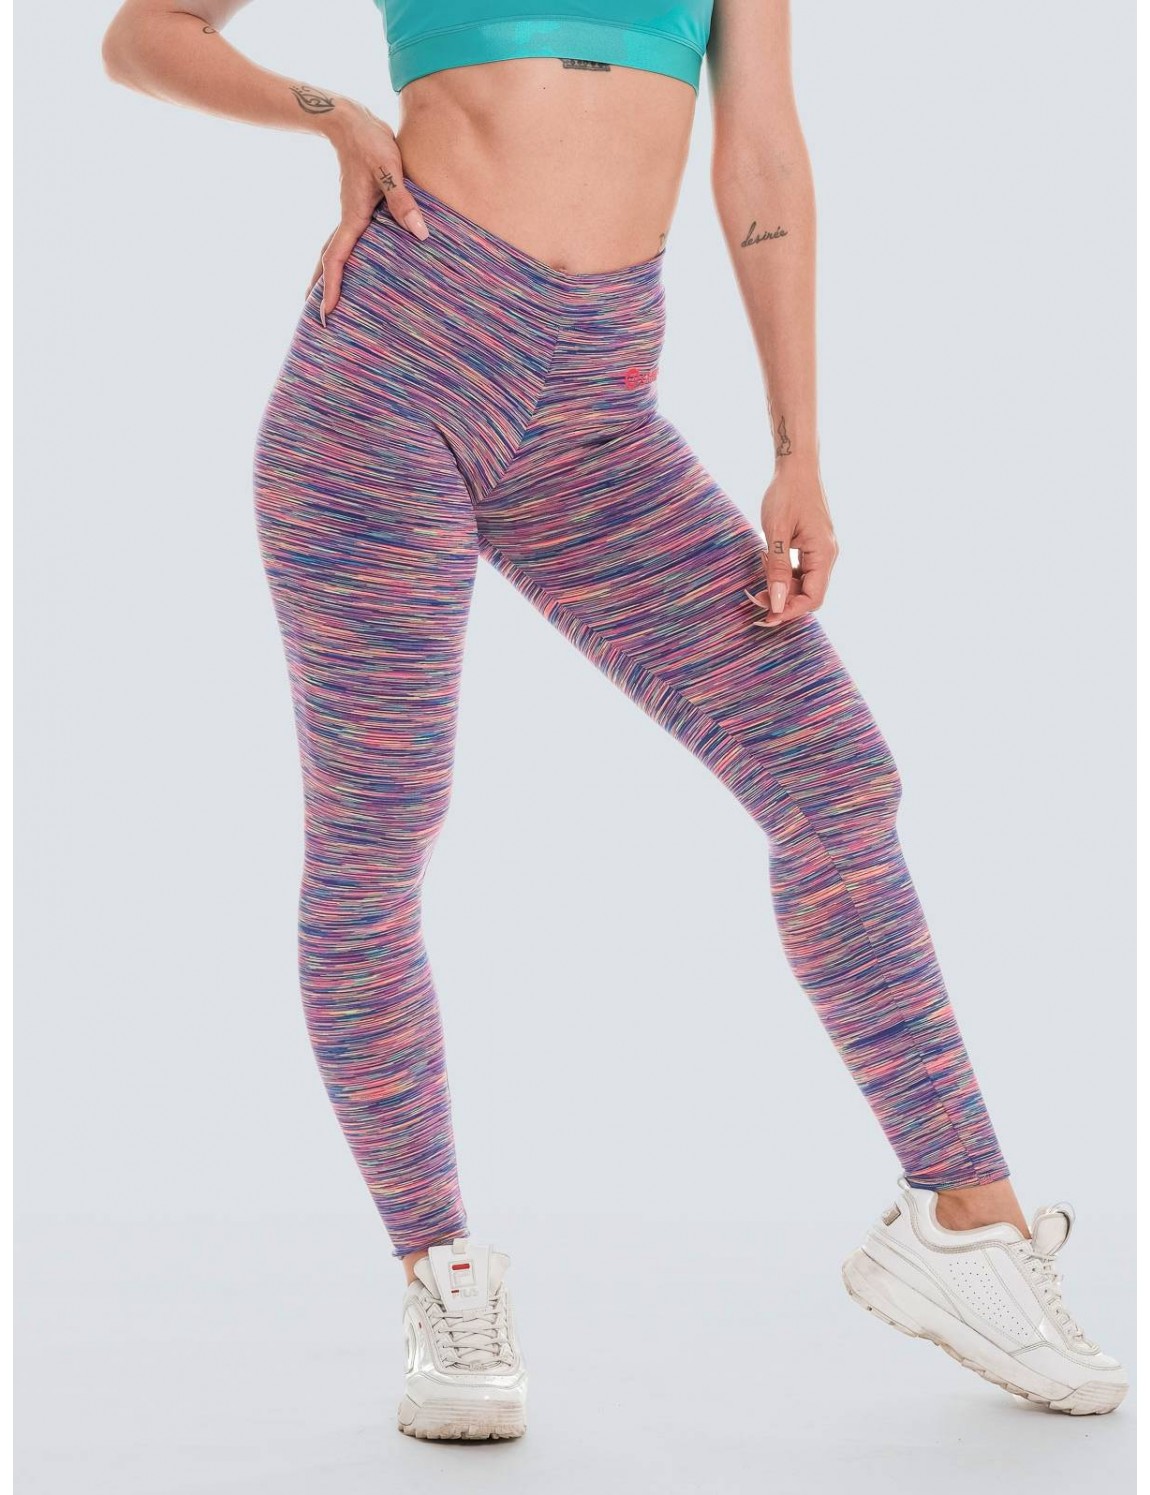 Colorful leggings for dance and